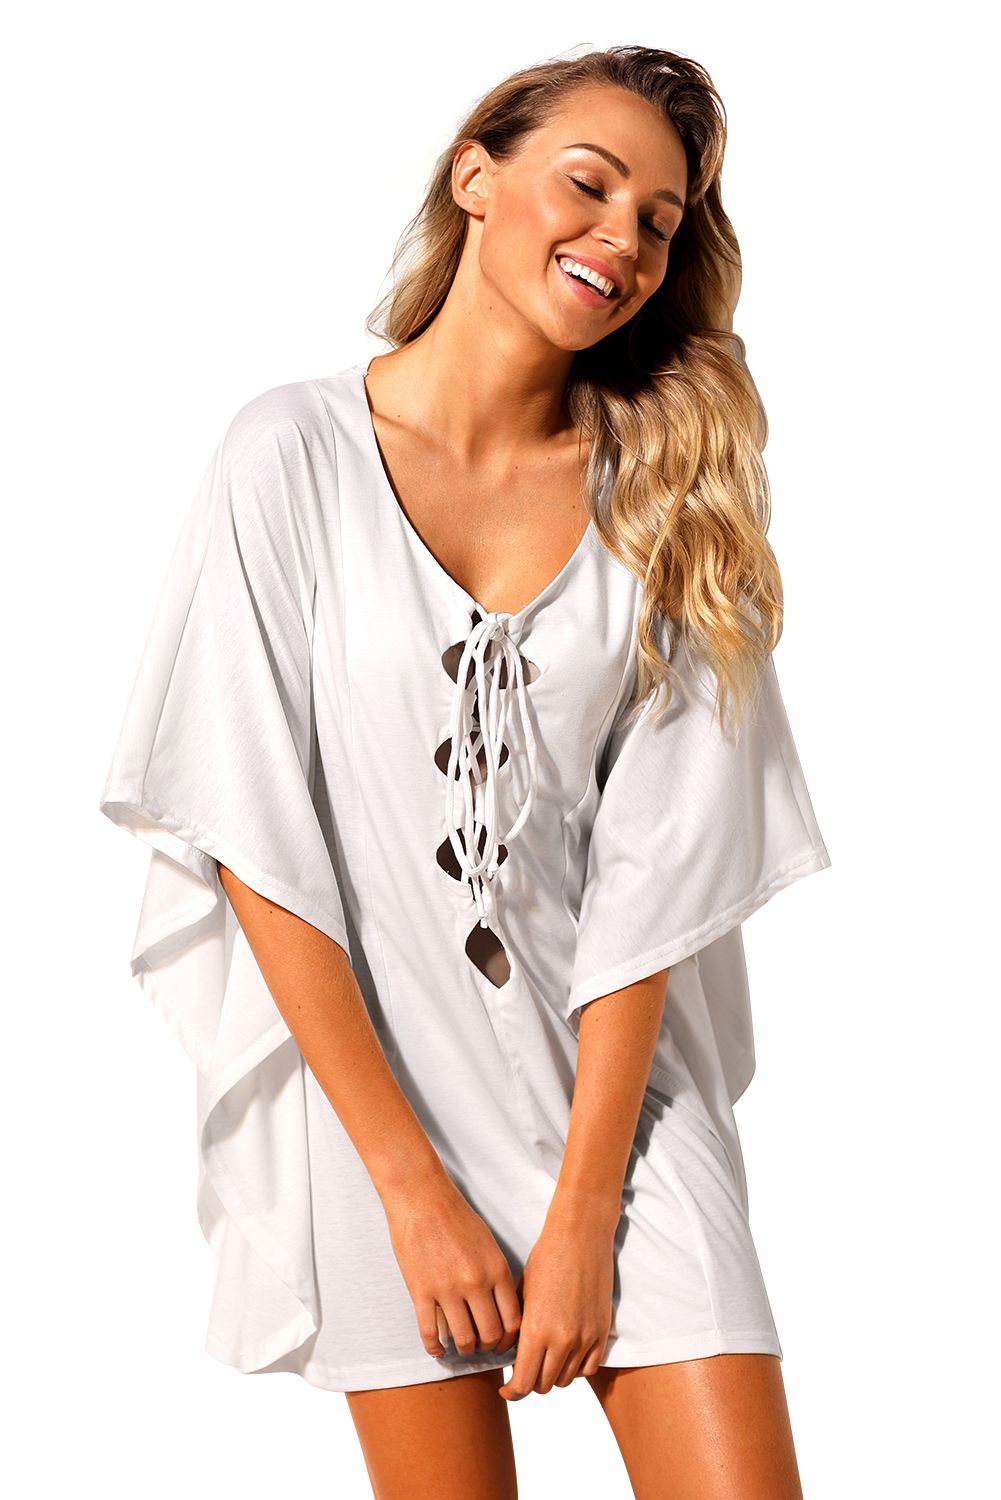 Lace up Tie Hollow-out Poncho Cover up - ARVOSS.COM